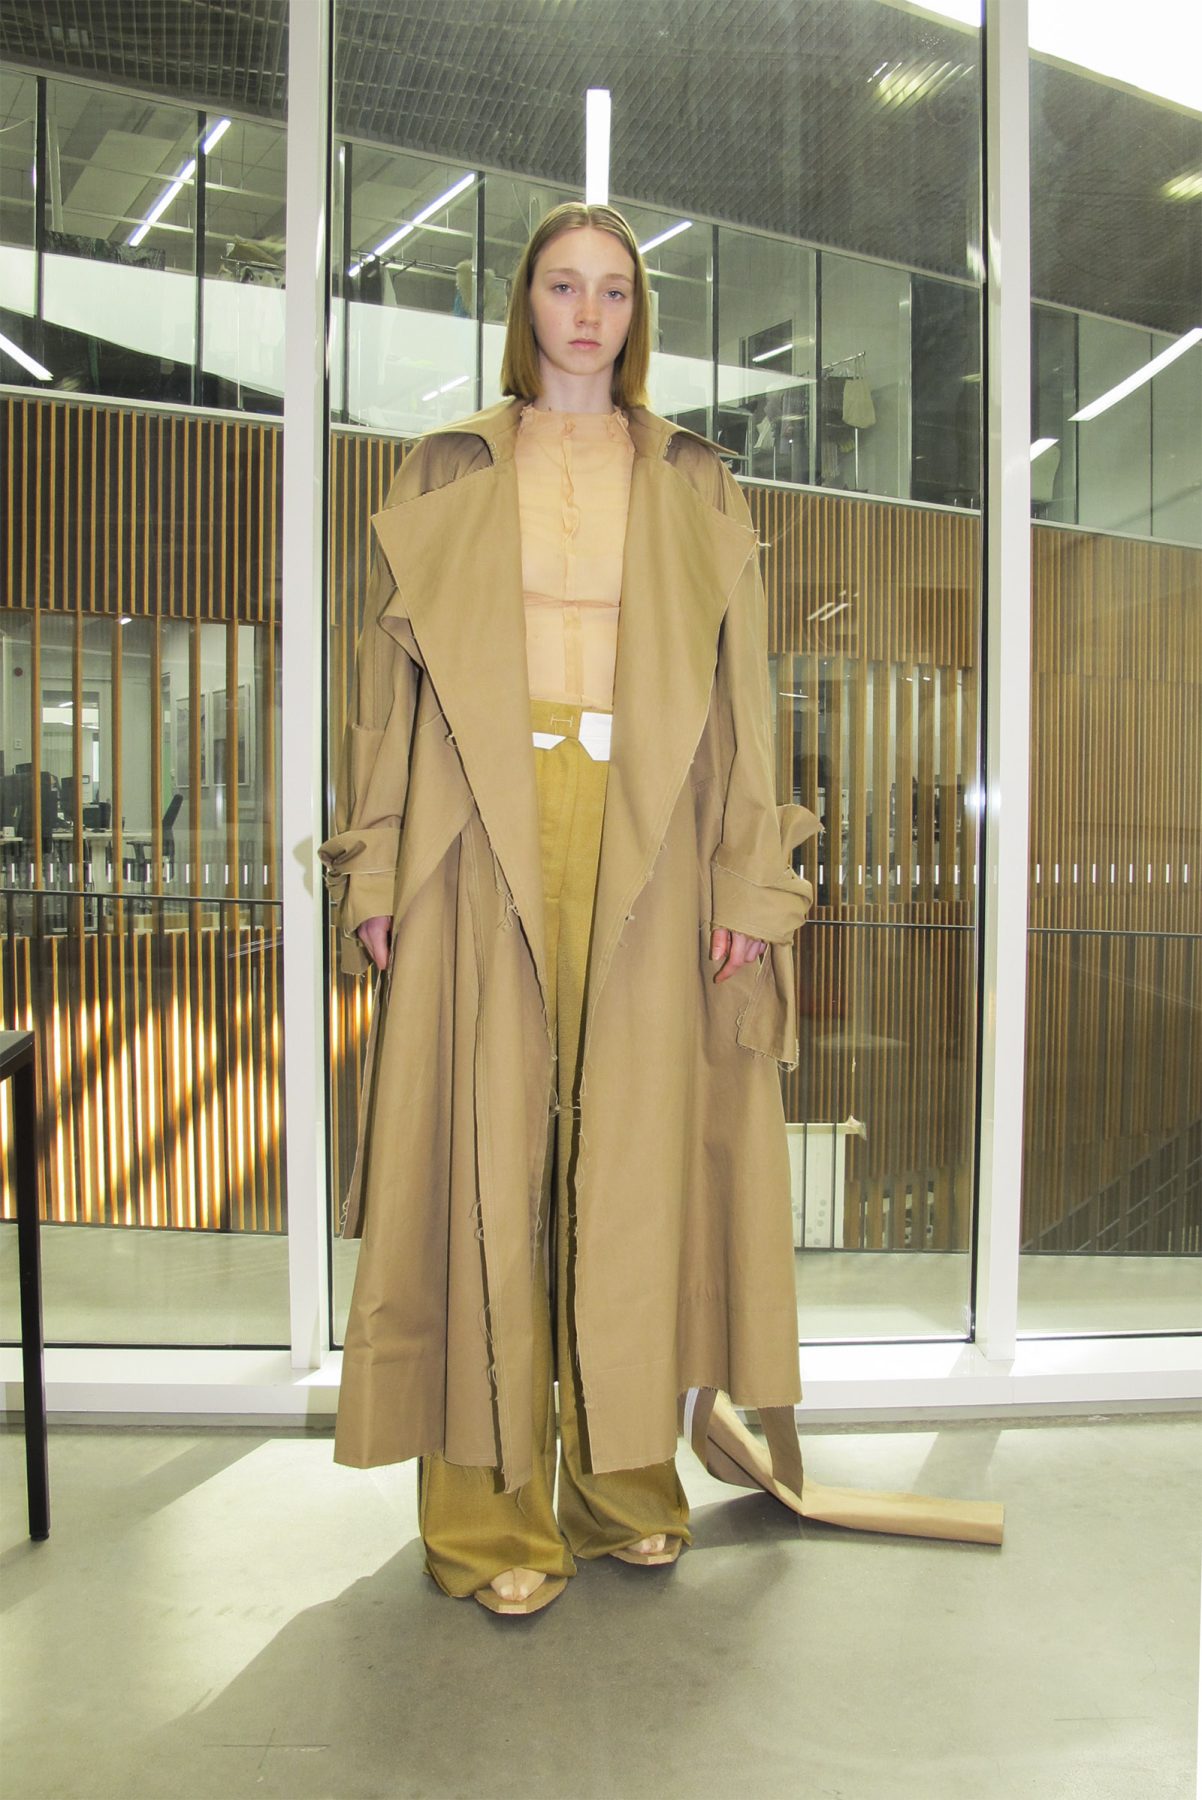 Model wearing a long trenchcoat with sheer top and sand-colored trousers